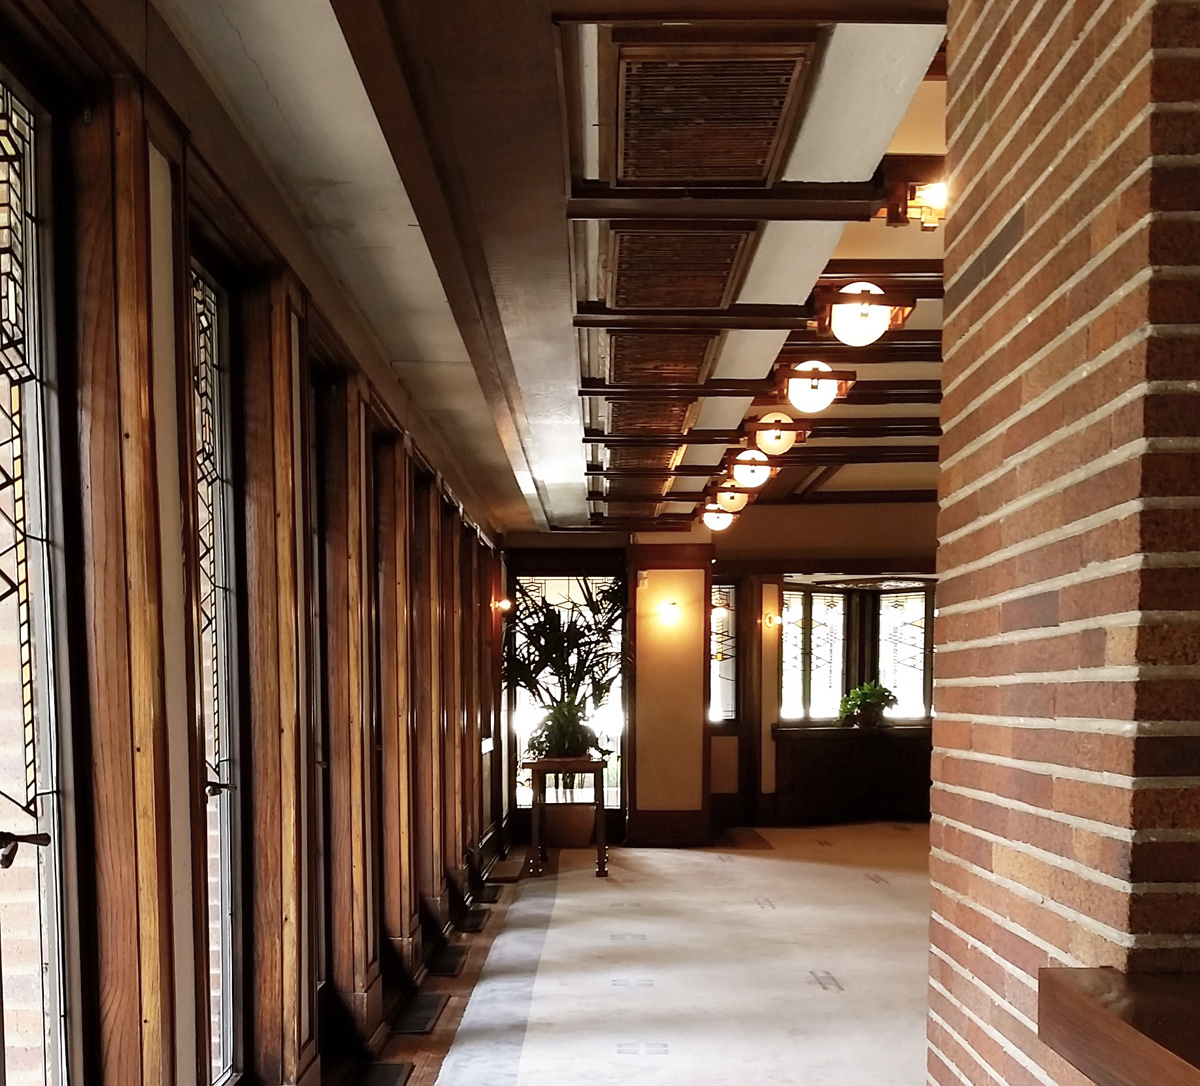 Lining Things Up: Learning from Frank Lloyd Wright